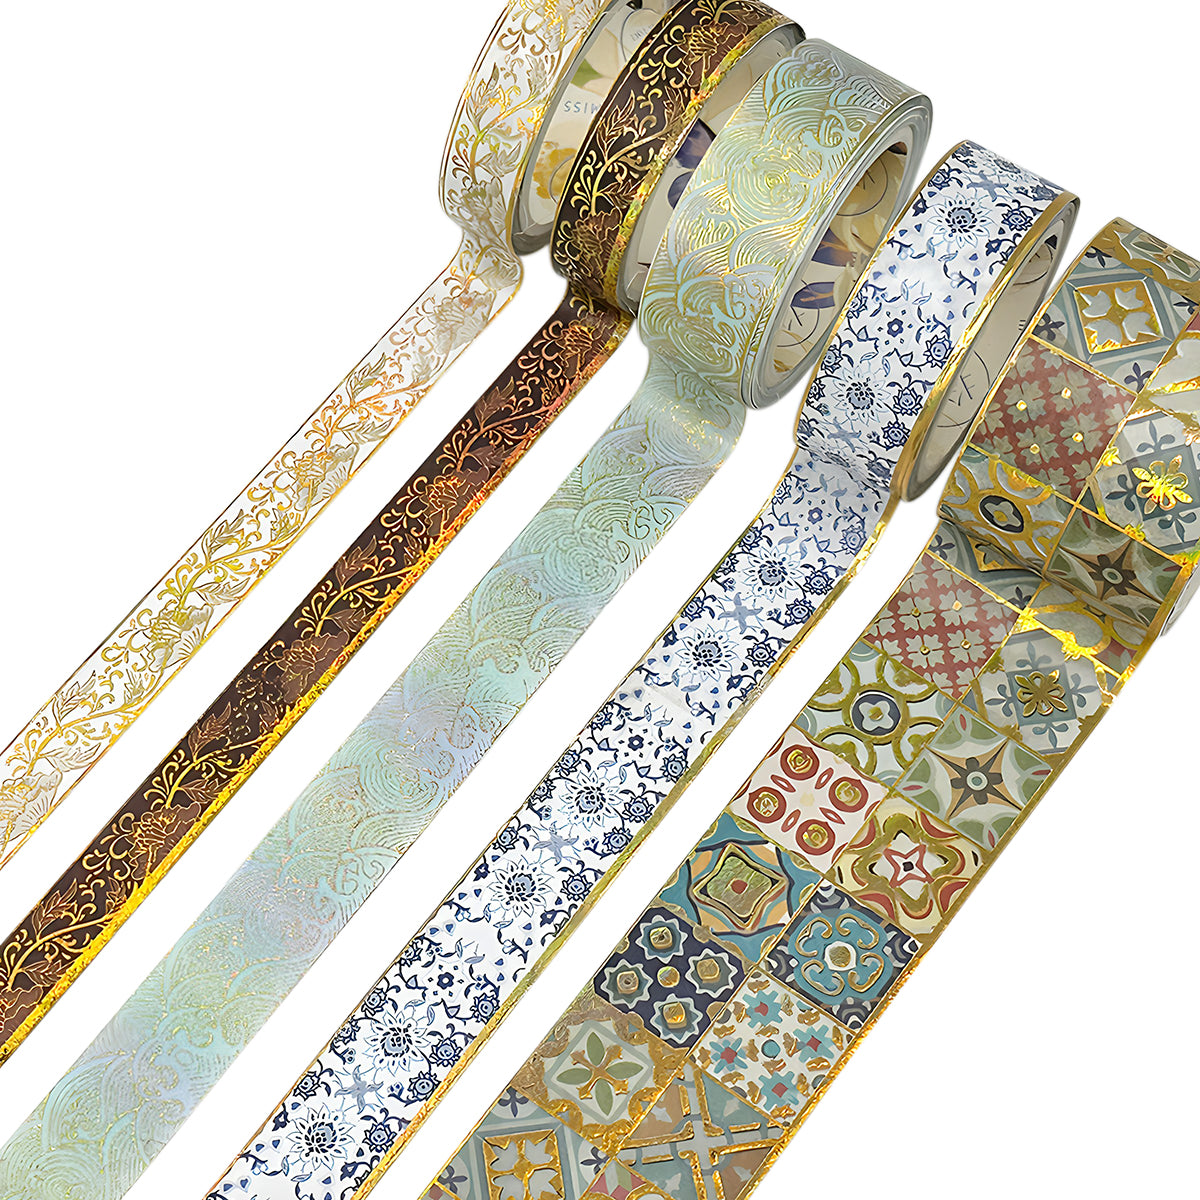 Metallic Washi Tape, Foil Washi, Colors Gold, Pink, and Teal, Various  Designs, Planner Decorations, Scrapbooking, Your Choice of 1 Roll 